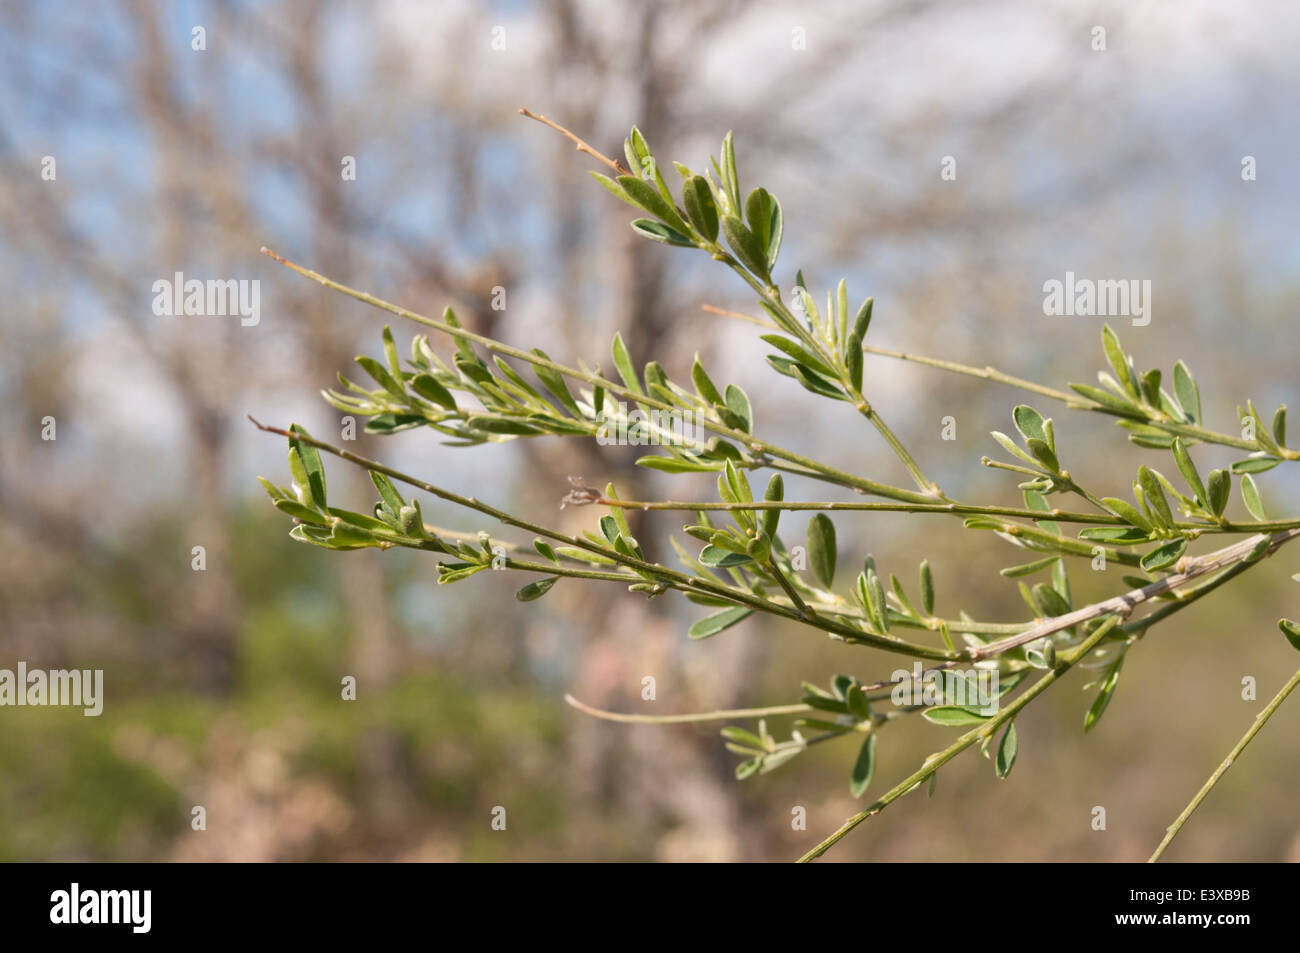 Leaves and branches of Genista florida Stock Photo